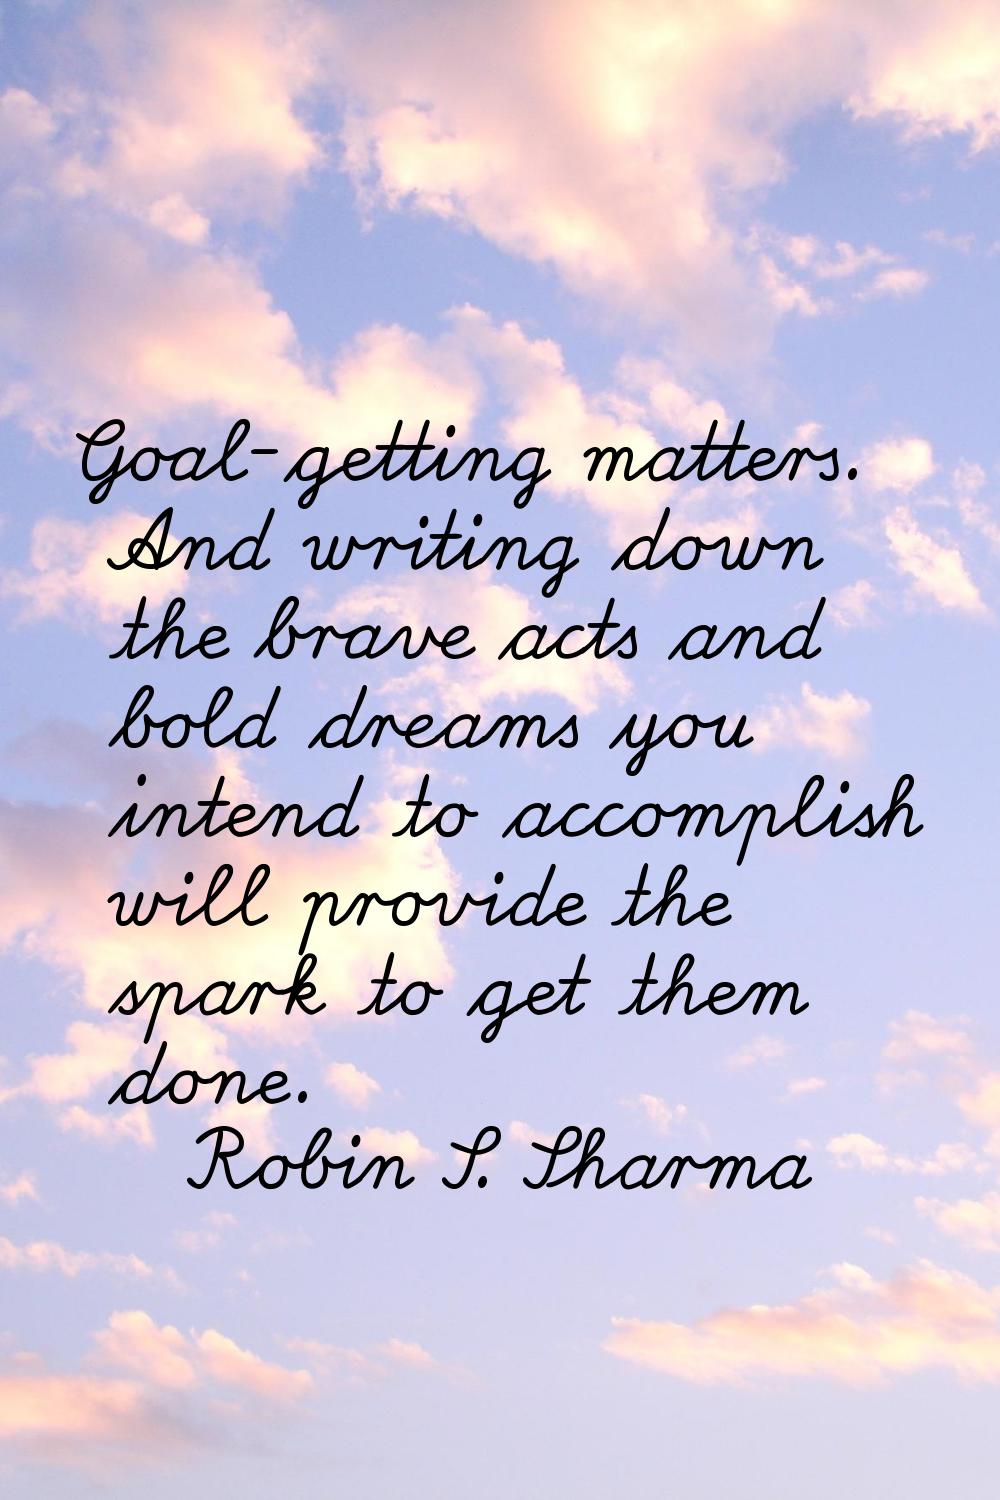 Goal-getting matters. And writing down the brave acts and bold dreams you intend to accomplish will